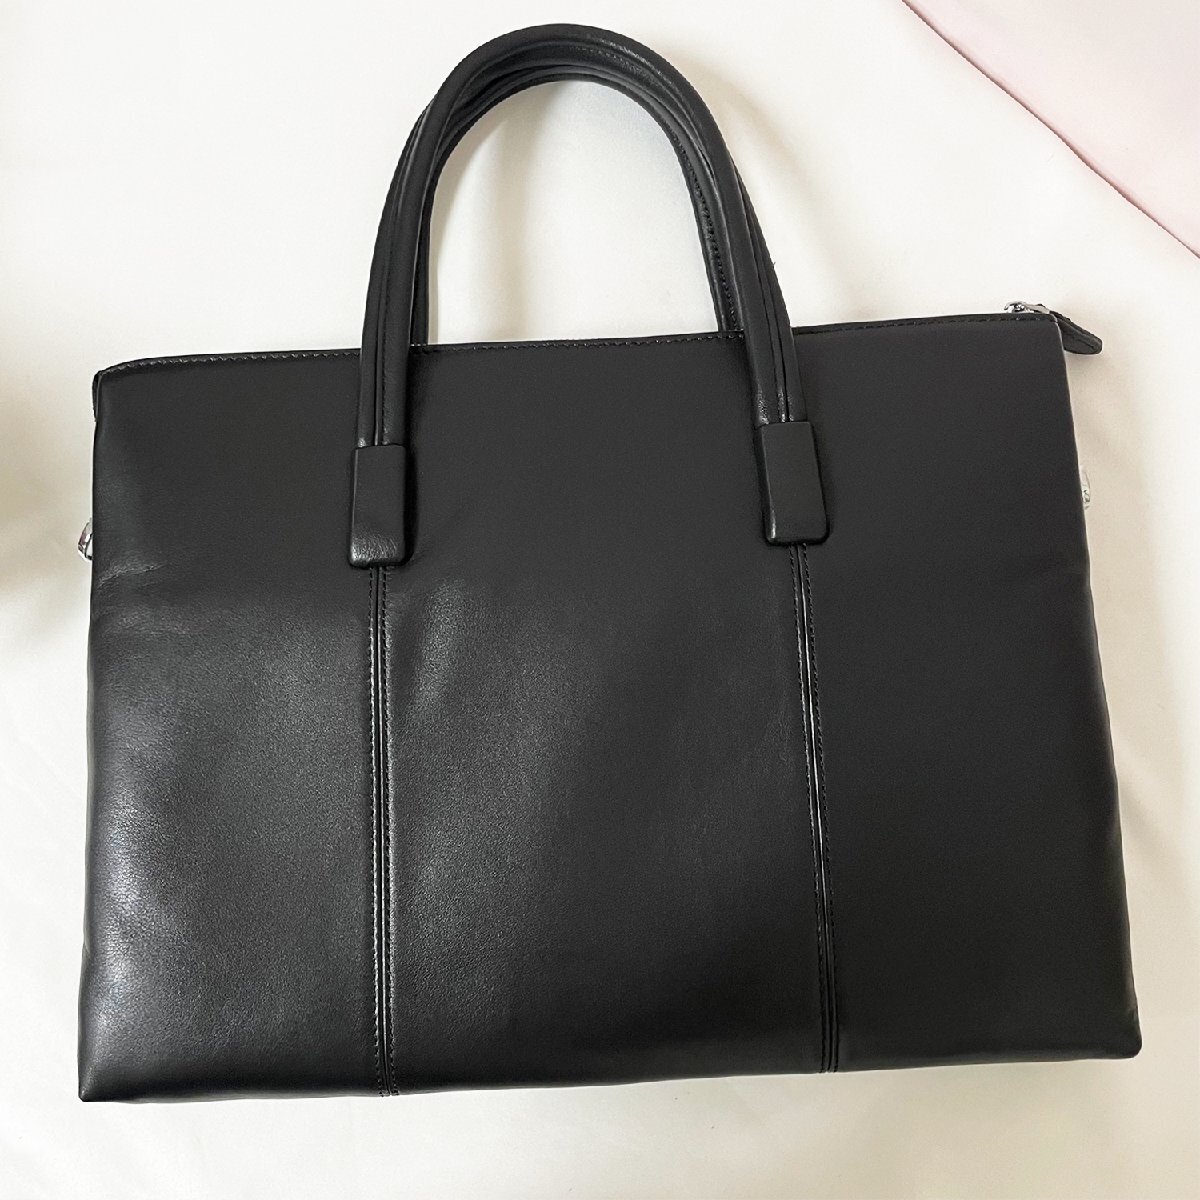  high class * briefcase regular price 12 ten thousand *Emmauela* Italy * milano departure * high quality cow leather leather thin type business bag 2WAY shoulder .. formal men's 